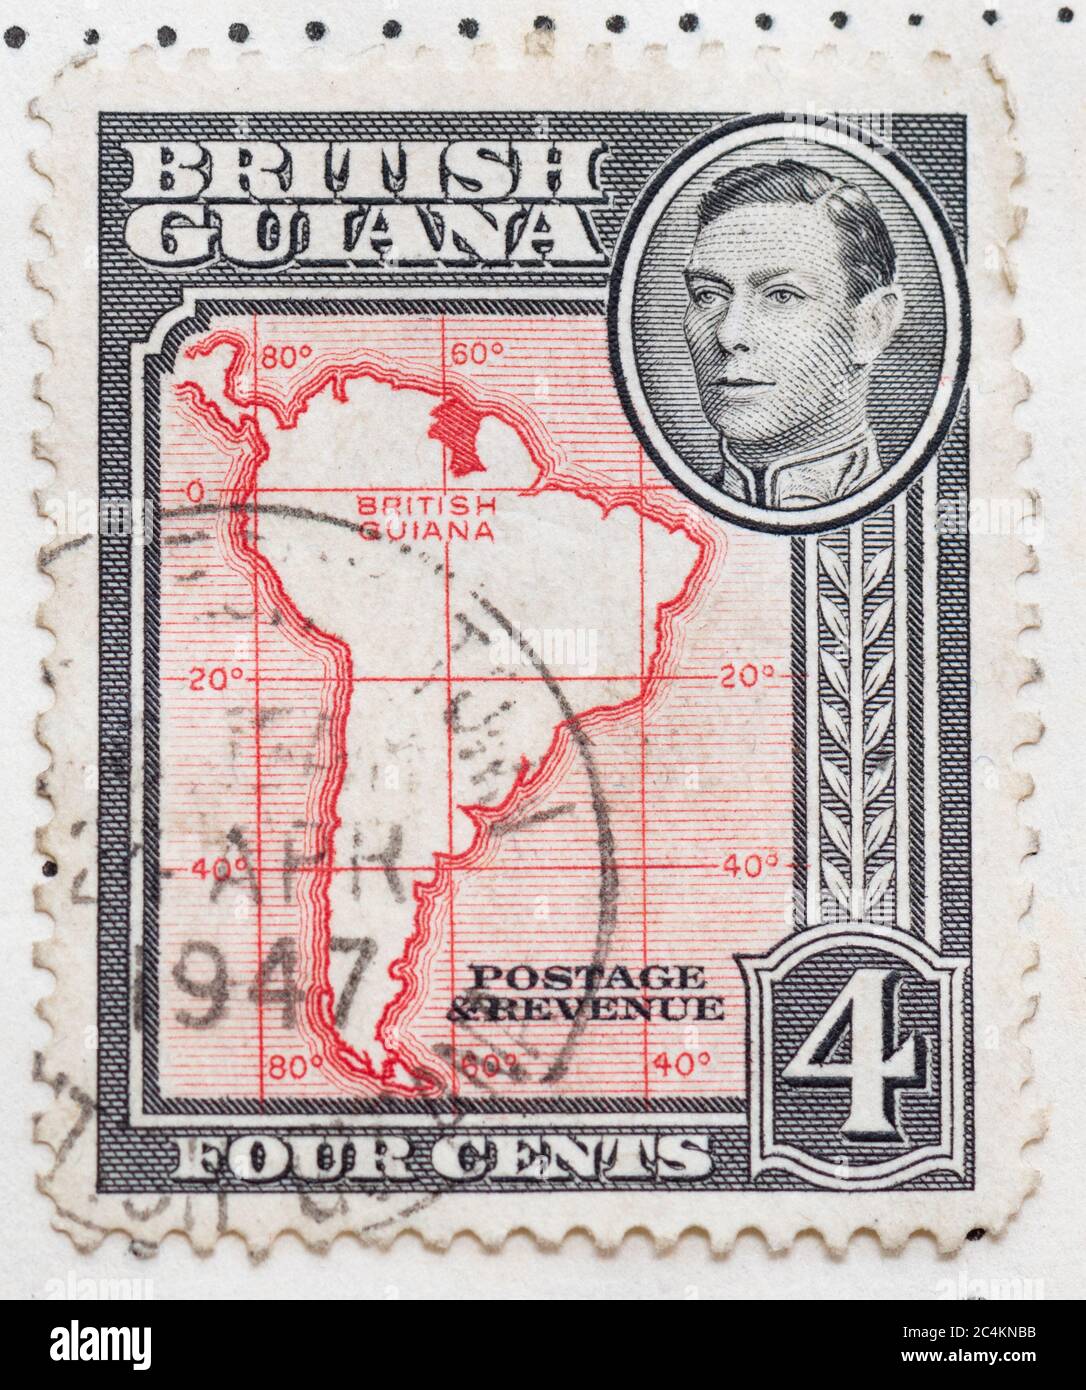 British Guiana postage stamp franked 1947 - former British colony now known as the independent nation of Guyana Stock Photo